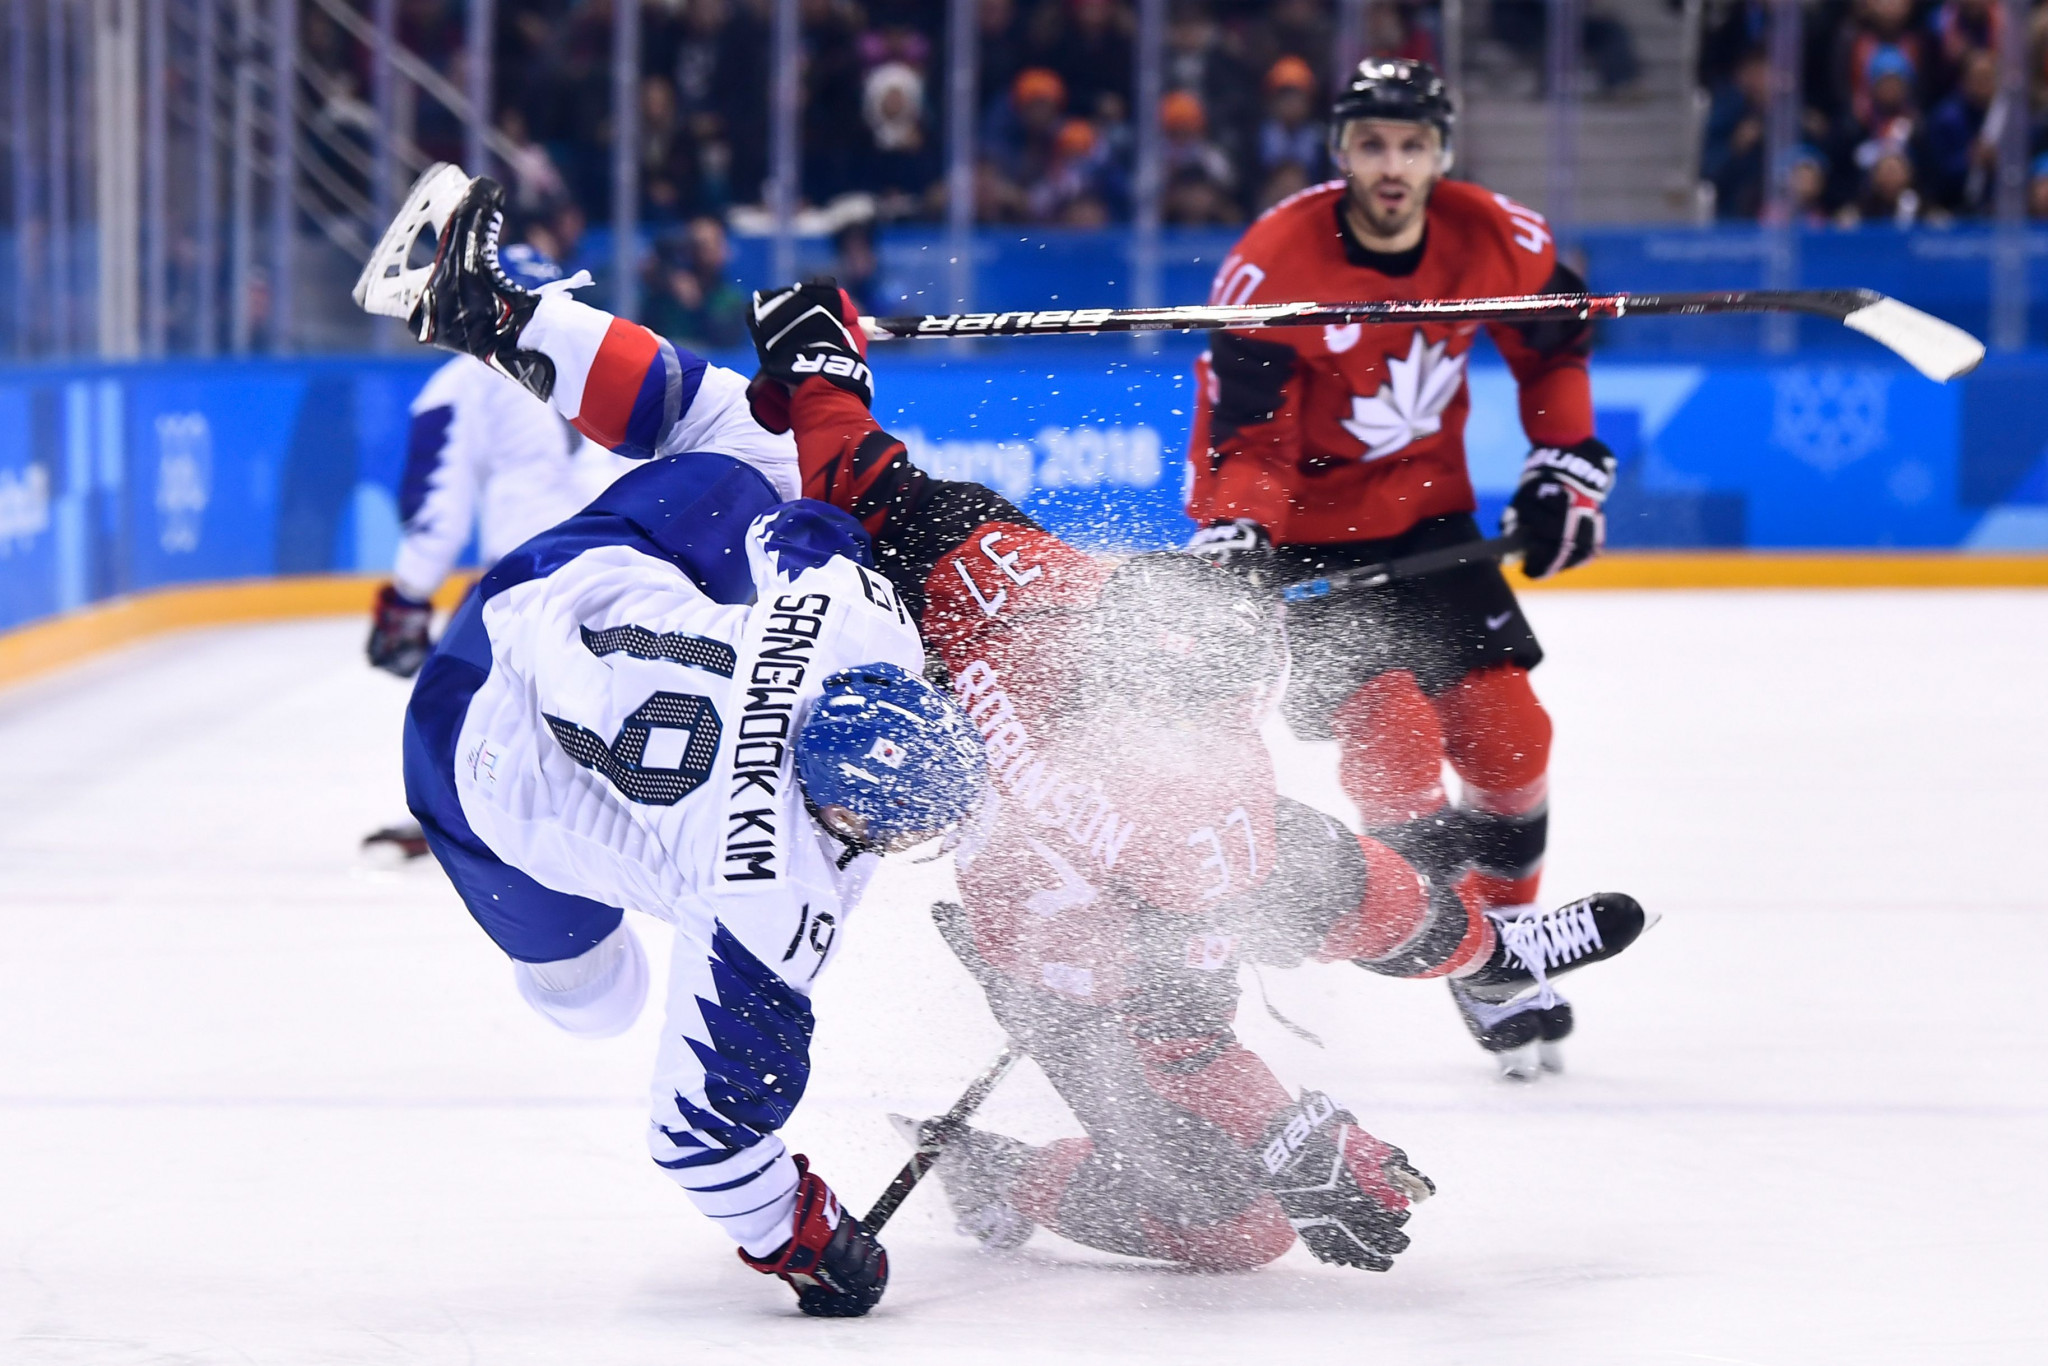 There were more clashes in the ice hockey tournament as preliminary round action continued ©Getty Images